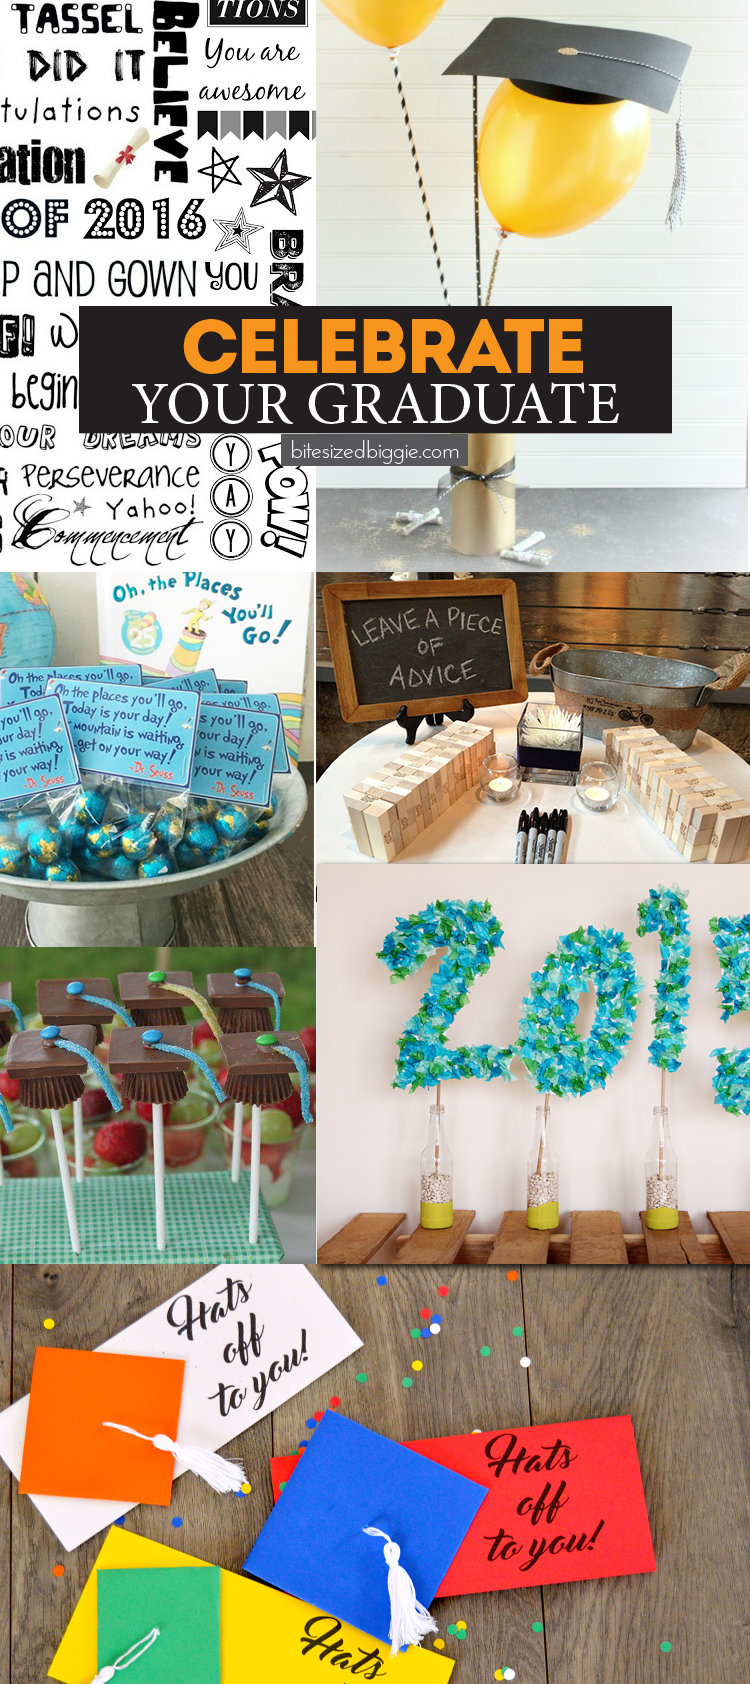 How to celebrate your graduate! Great ideas for gradution gifts and parties!